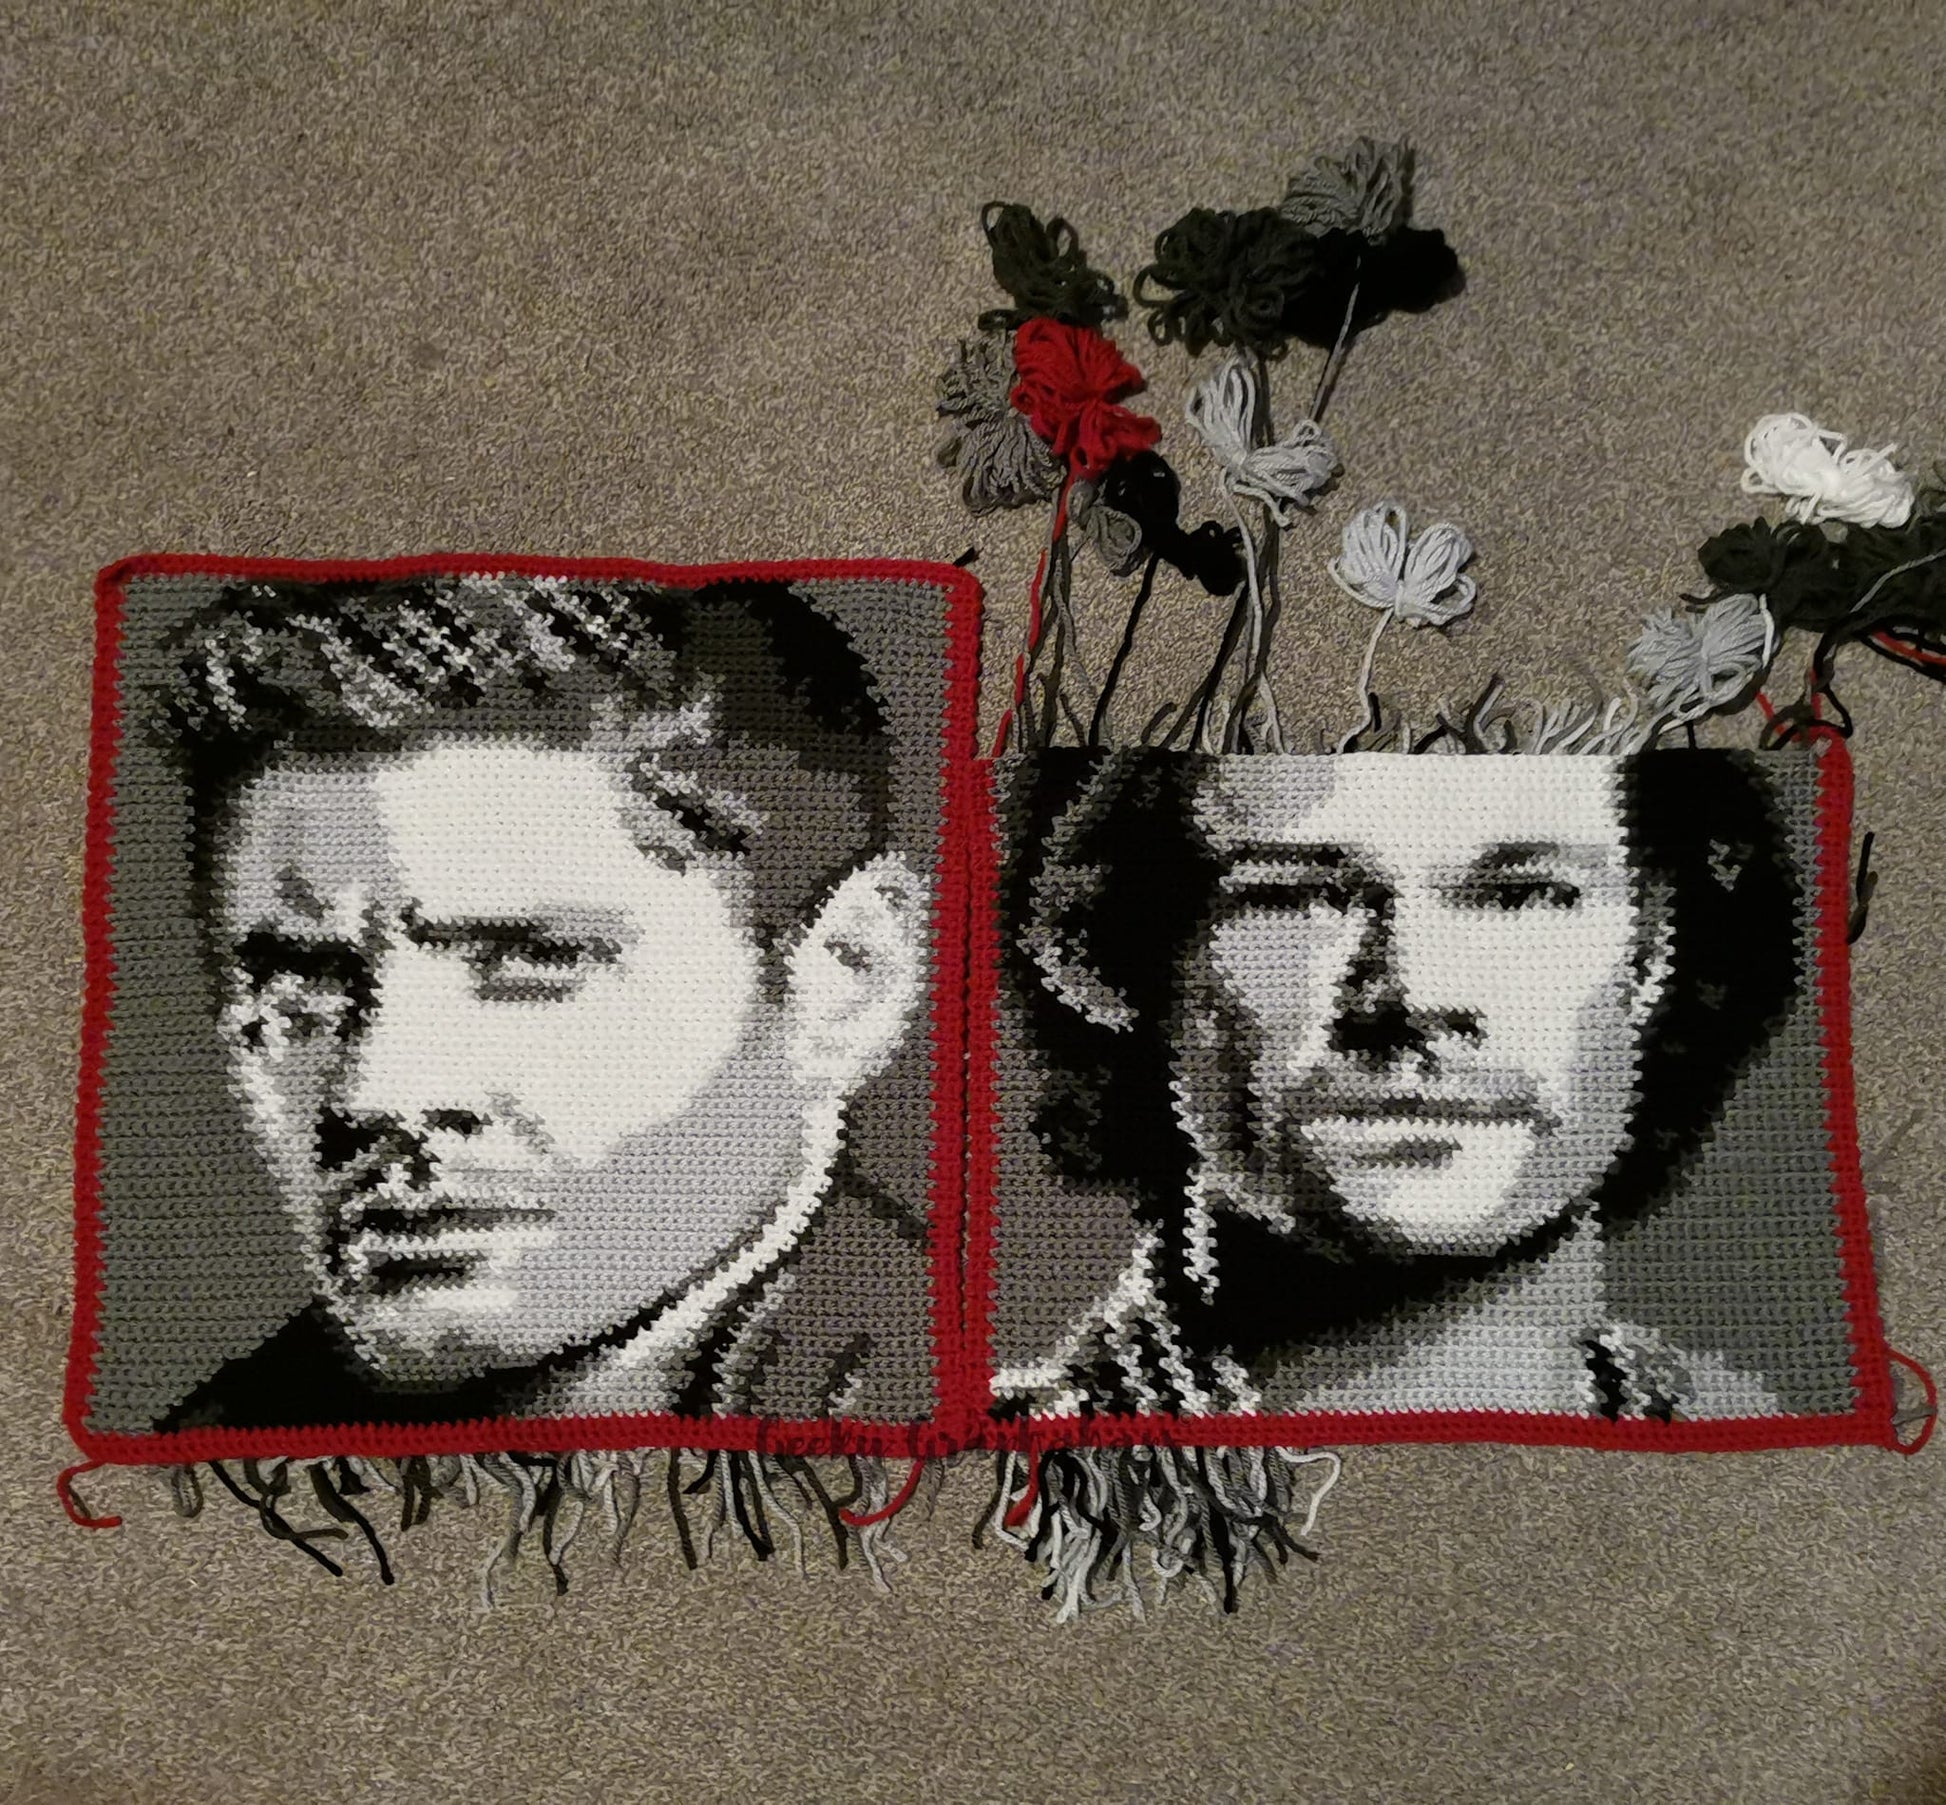 Sam and Dean Winchester photo crochet graphghan patterns